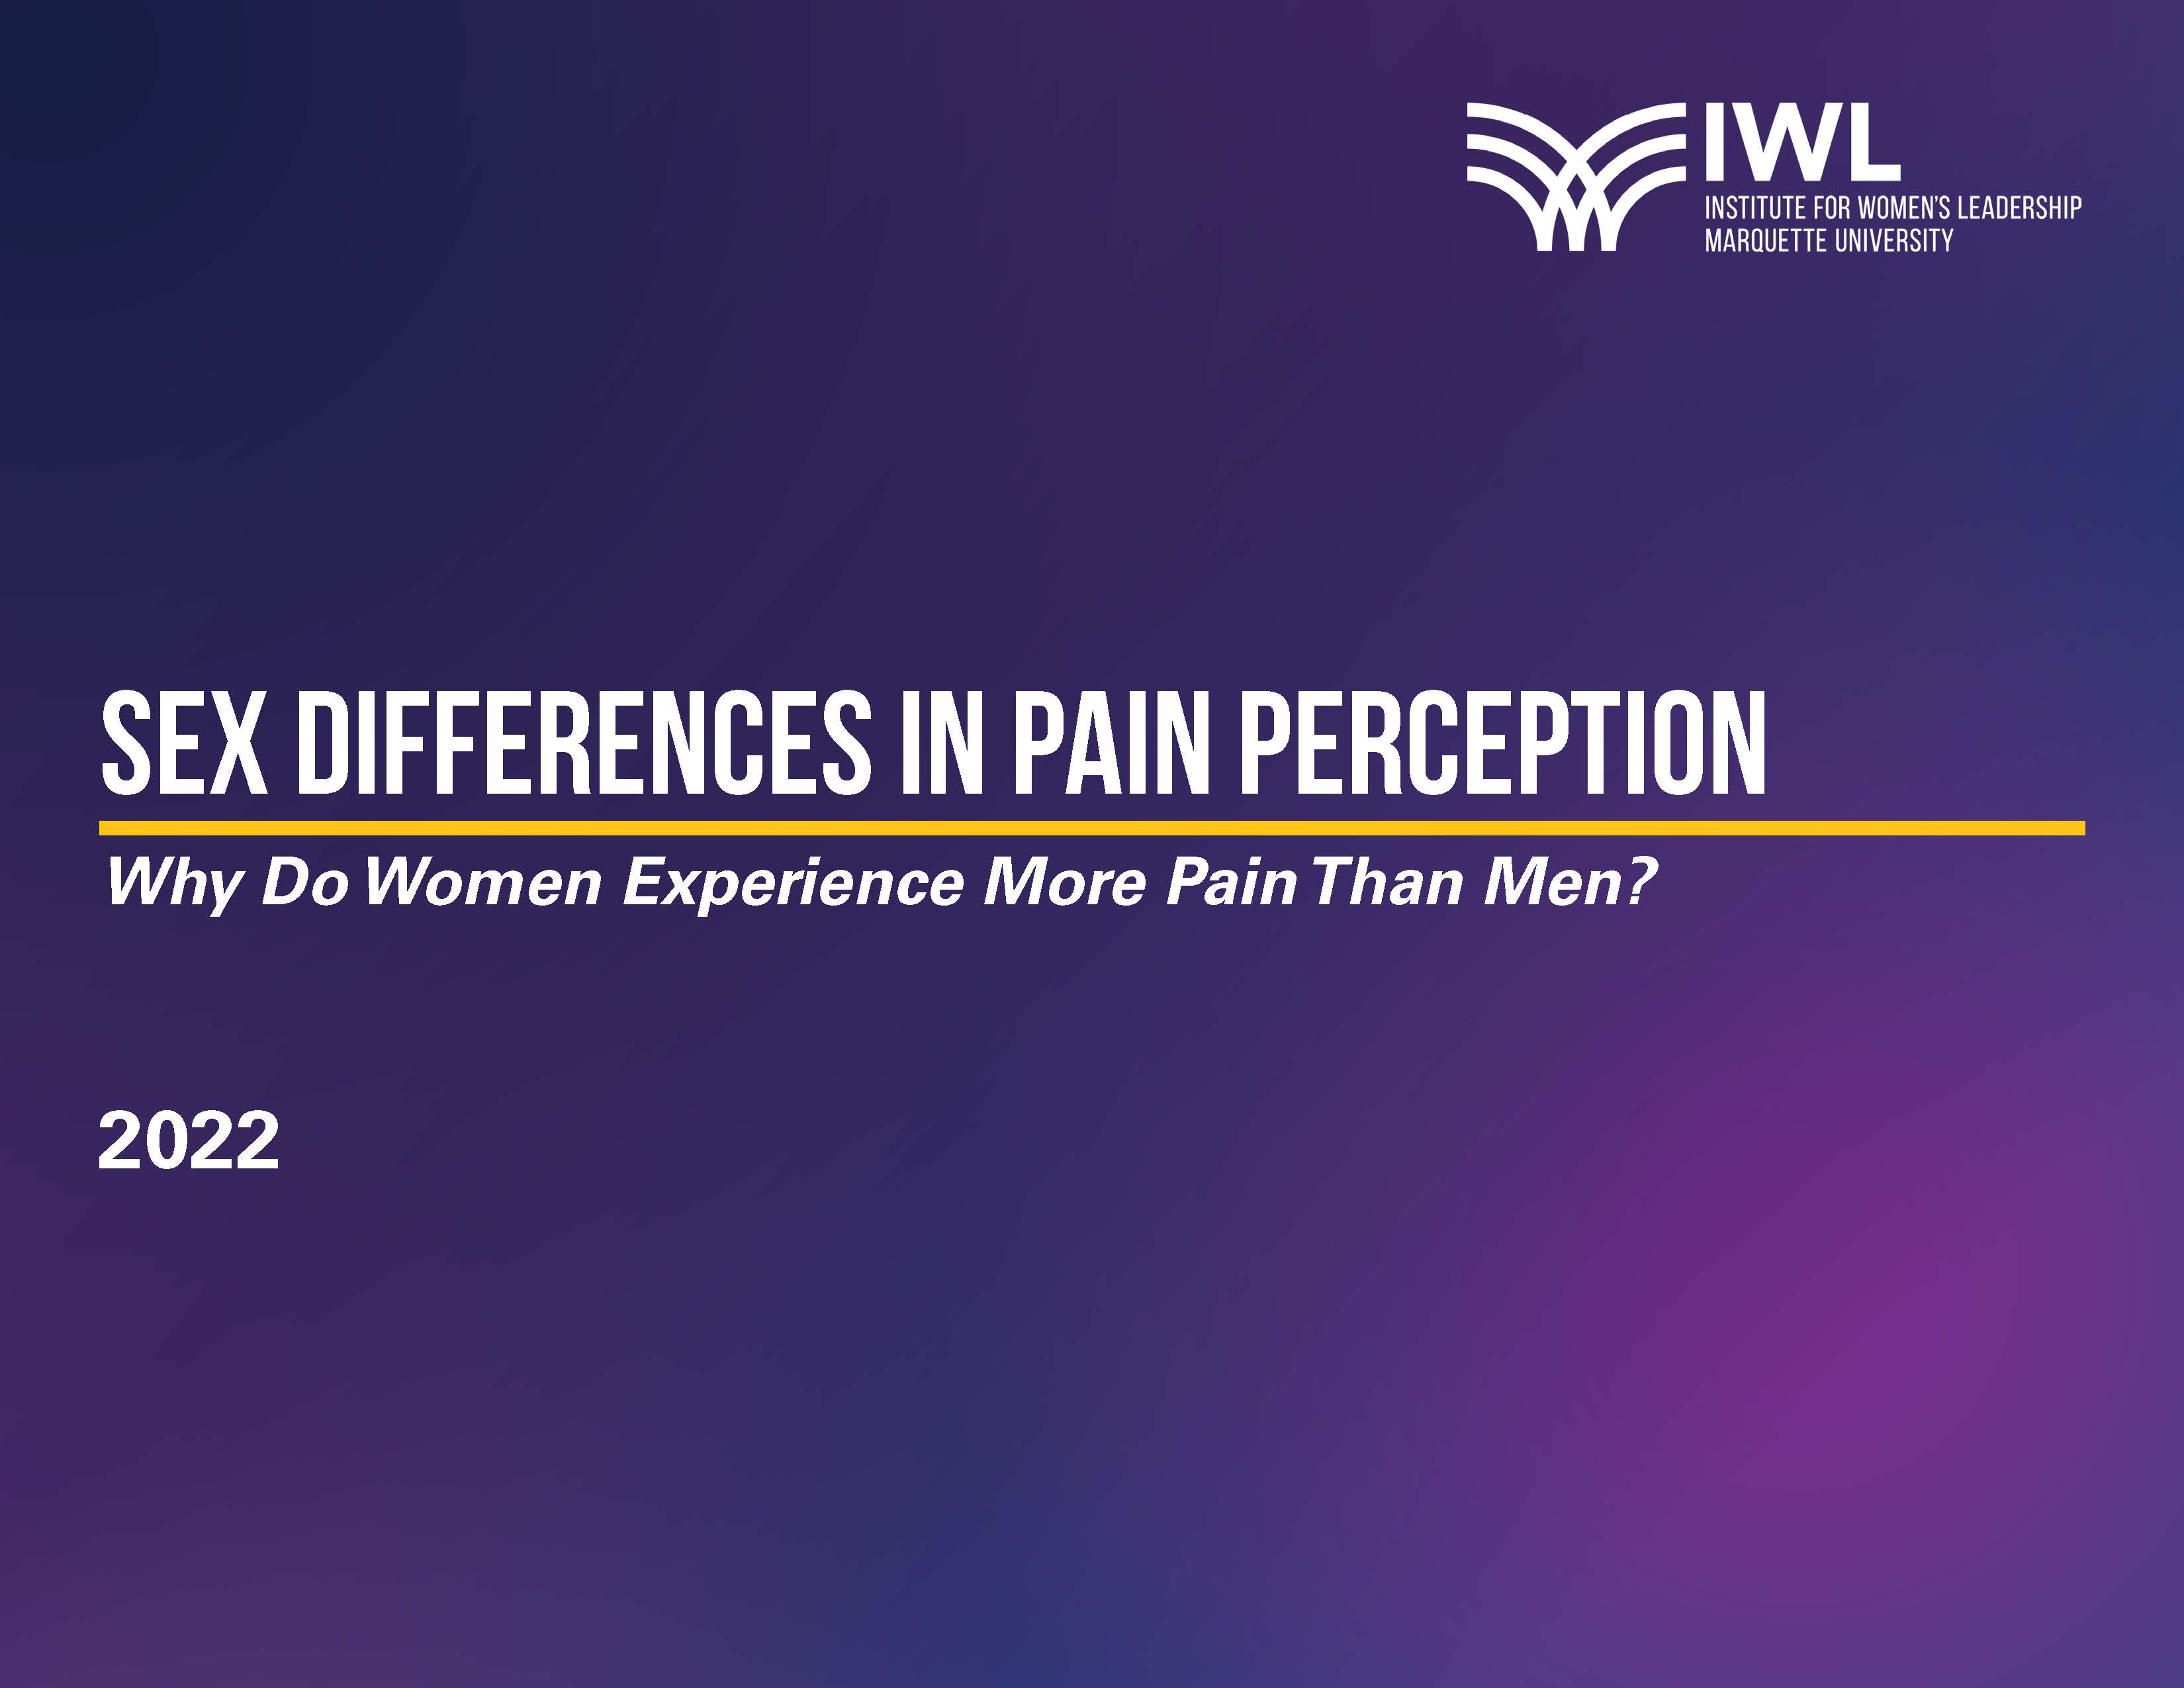 Front Cover of "Sex Differences in Pain Persception" (white paper)